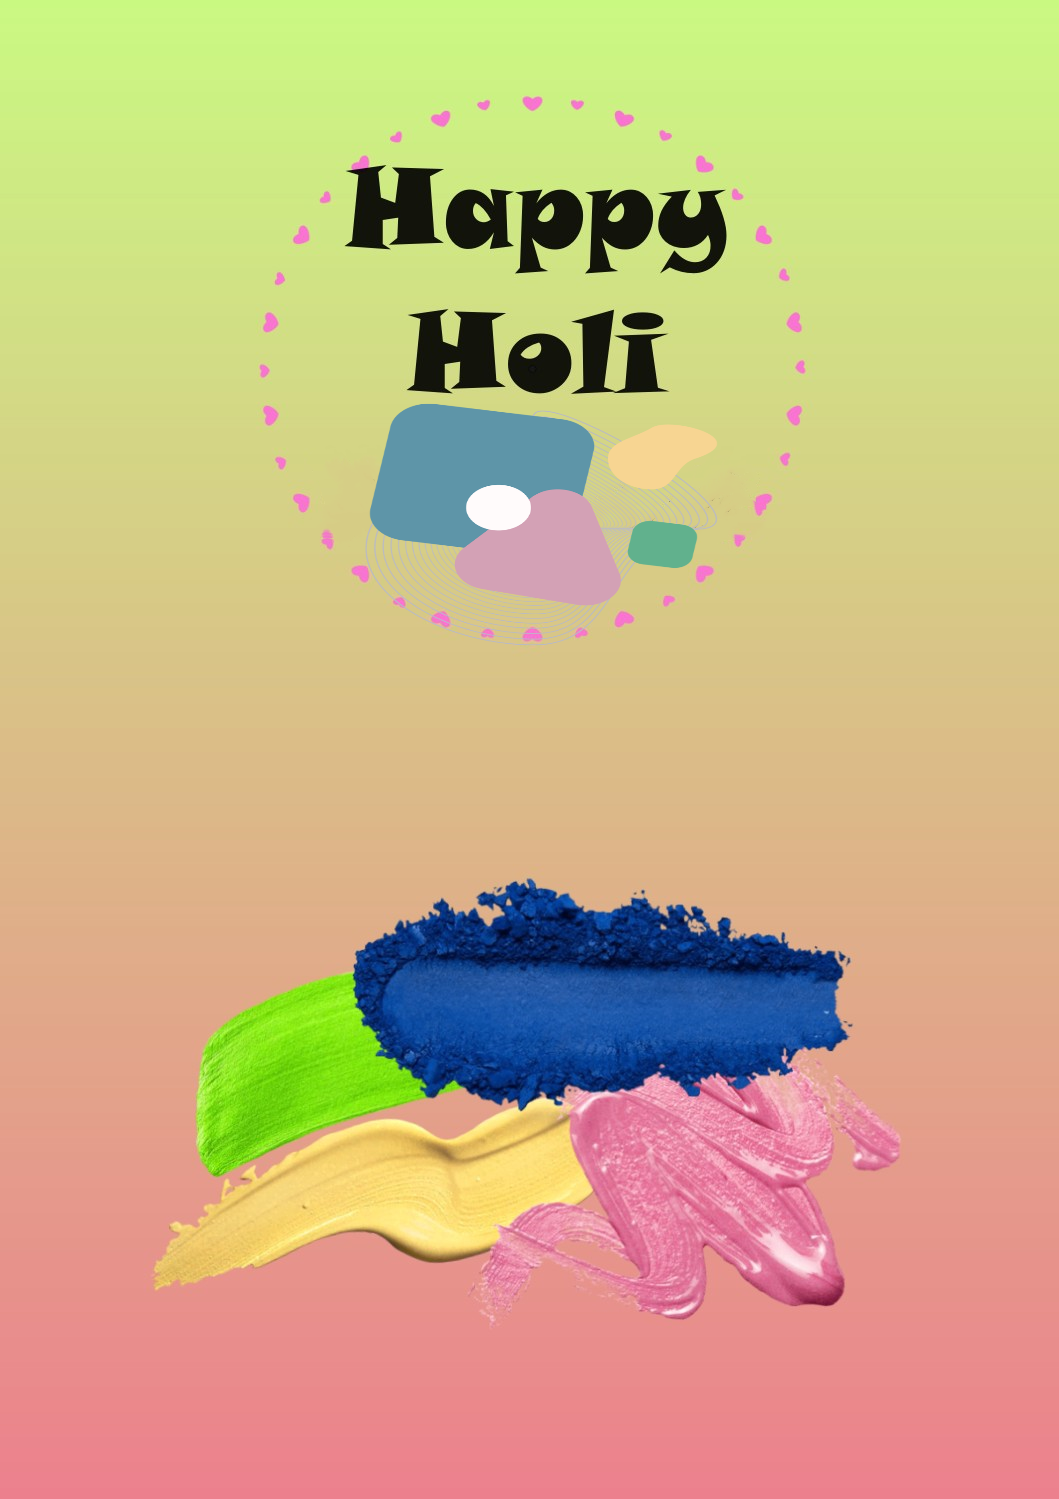 20 Happy Holi Wishes, Quotes & Messages